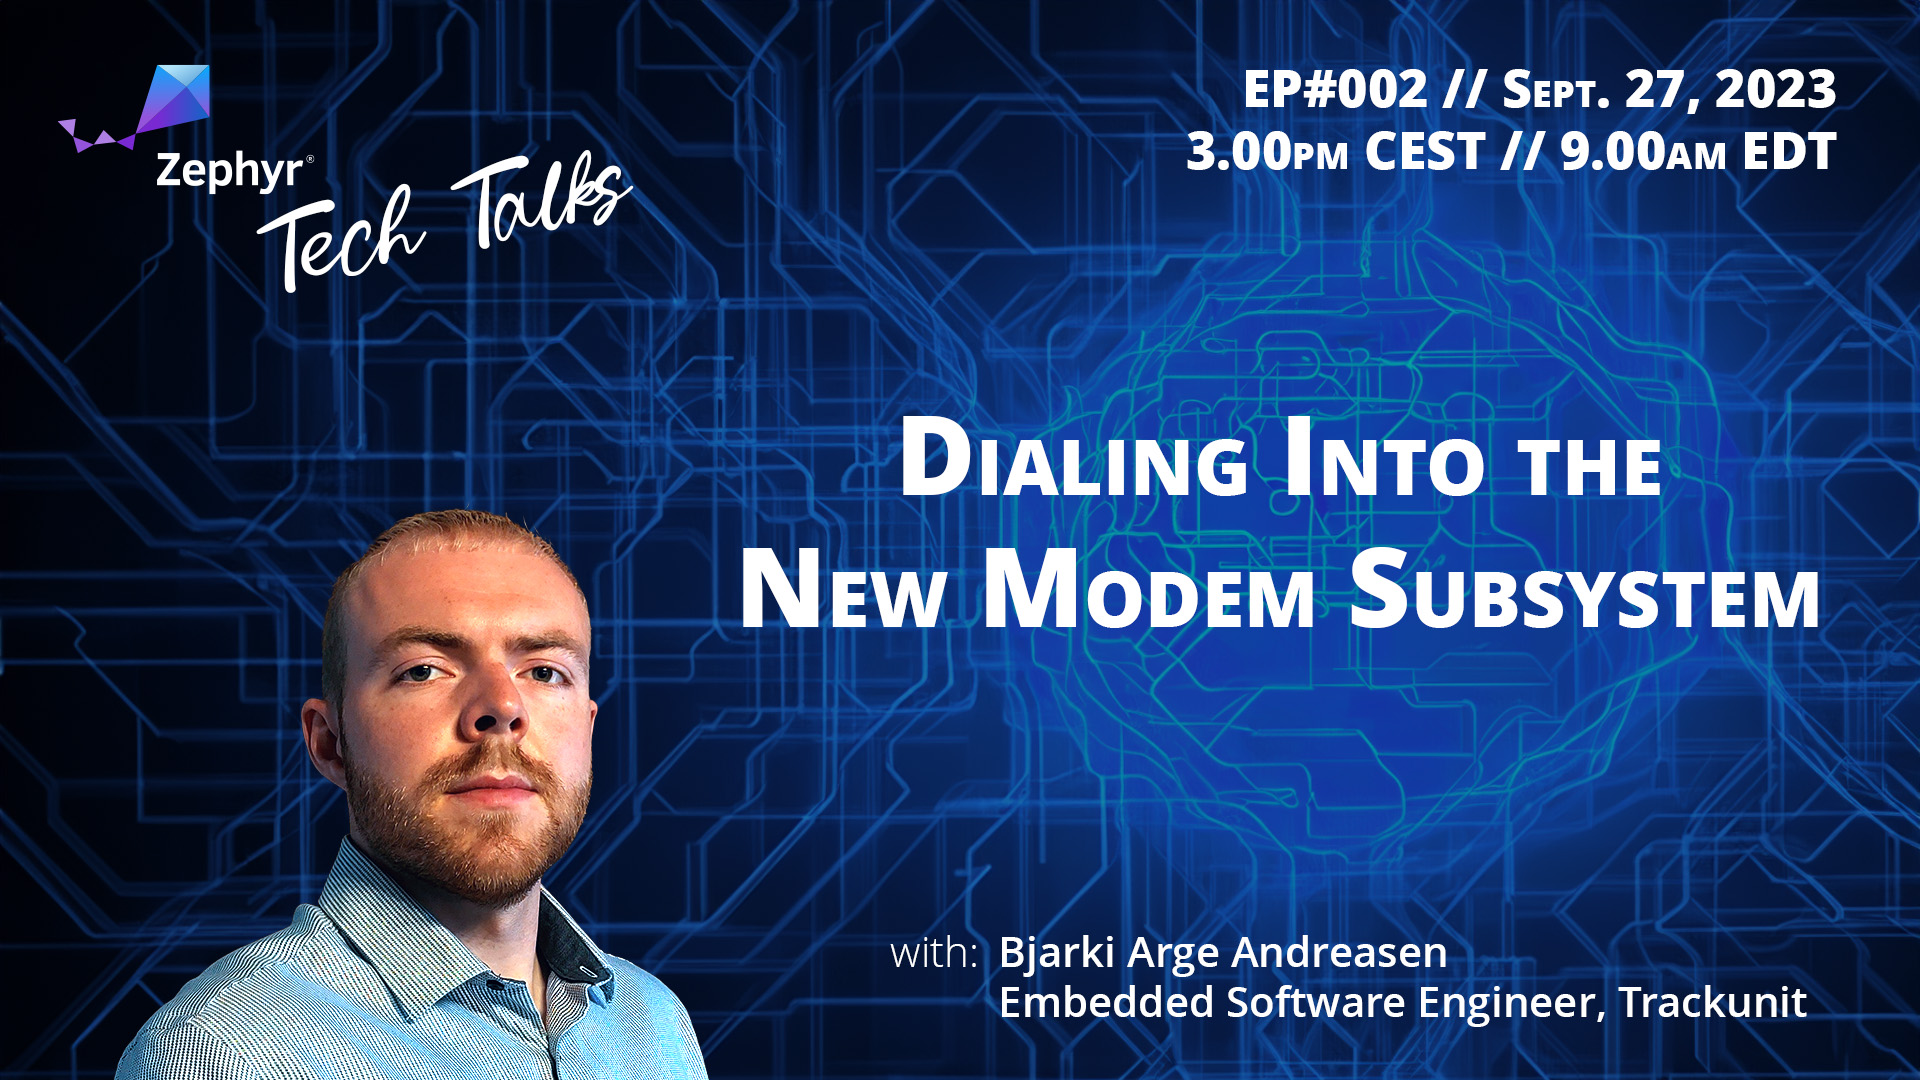 Zephyr Tech Talk #002 - Dialing into the Modem Subsystem